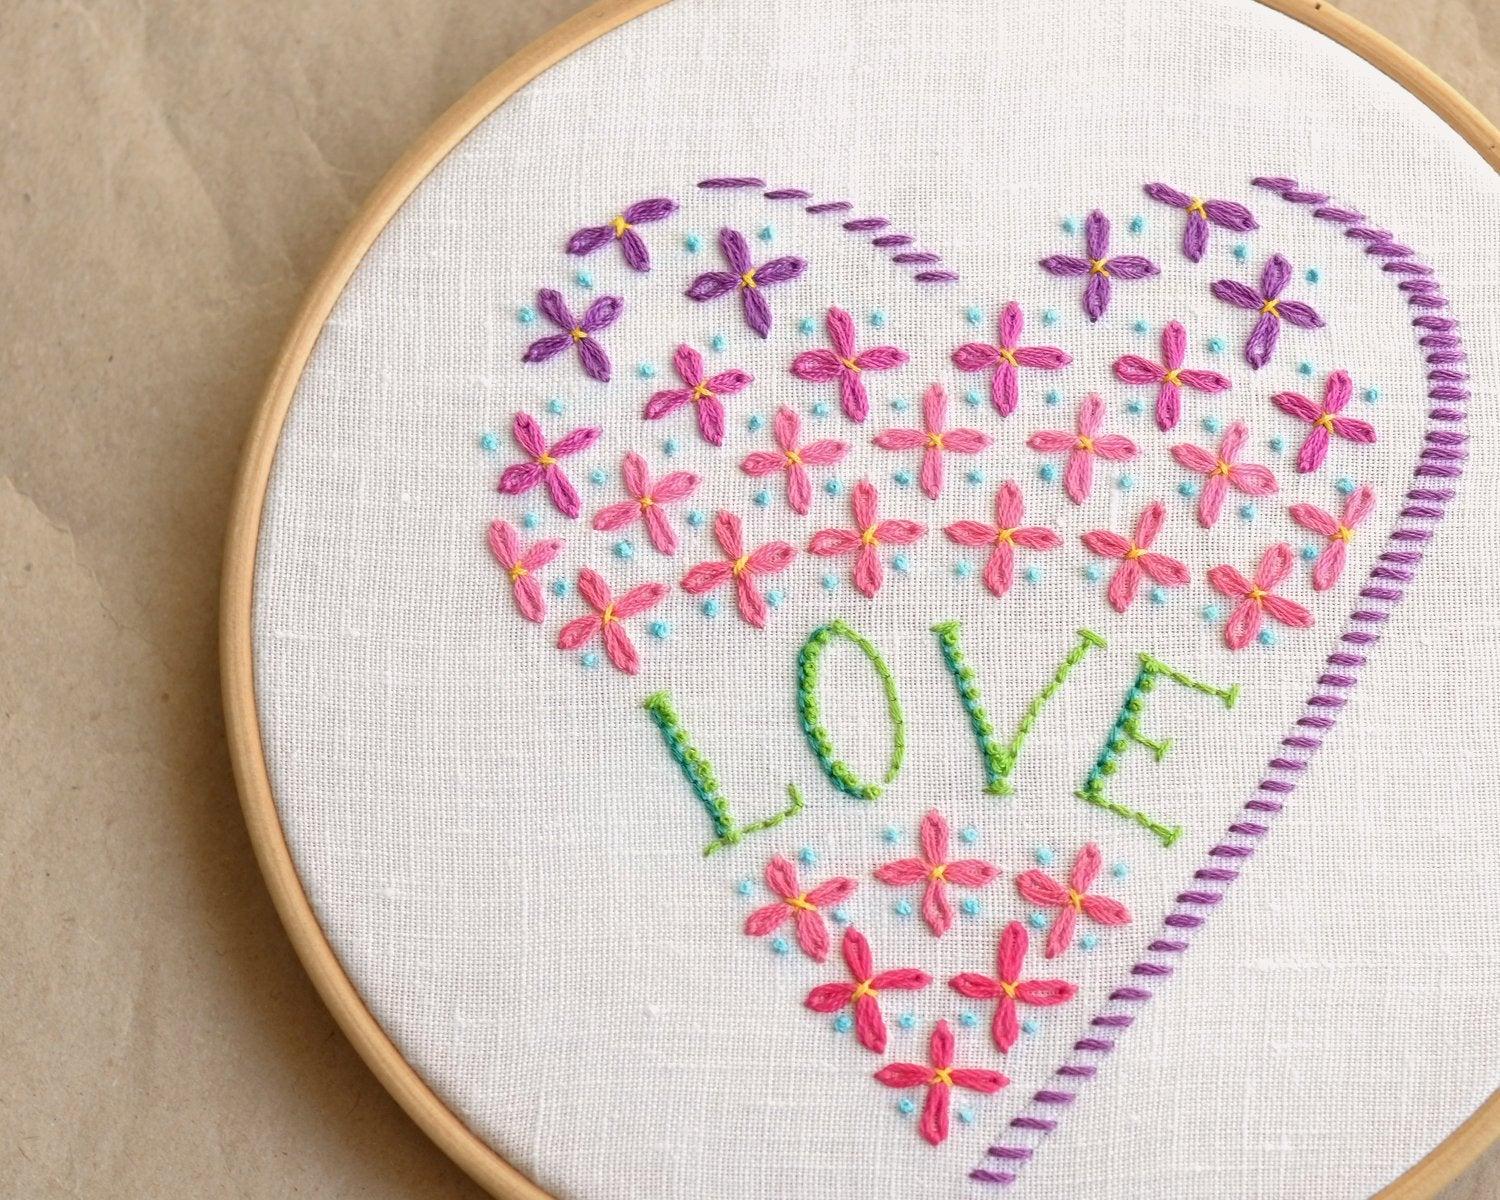 English Embroidery Patterns Hand Embroidery Patterns Pdf Valentine Embroidery Design Diy Naiveneedle